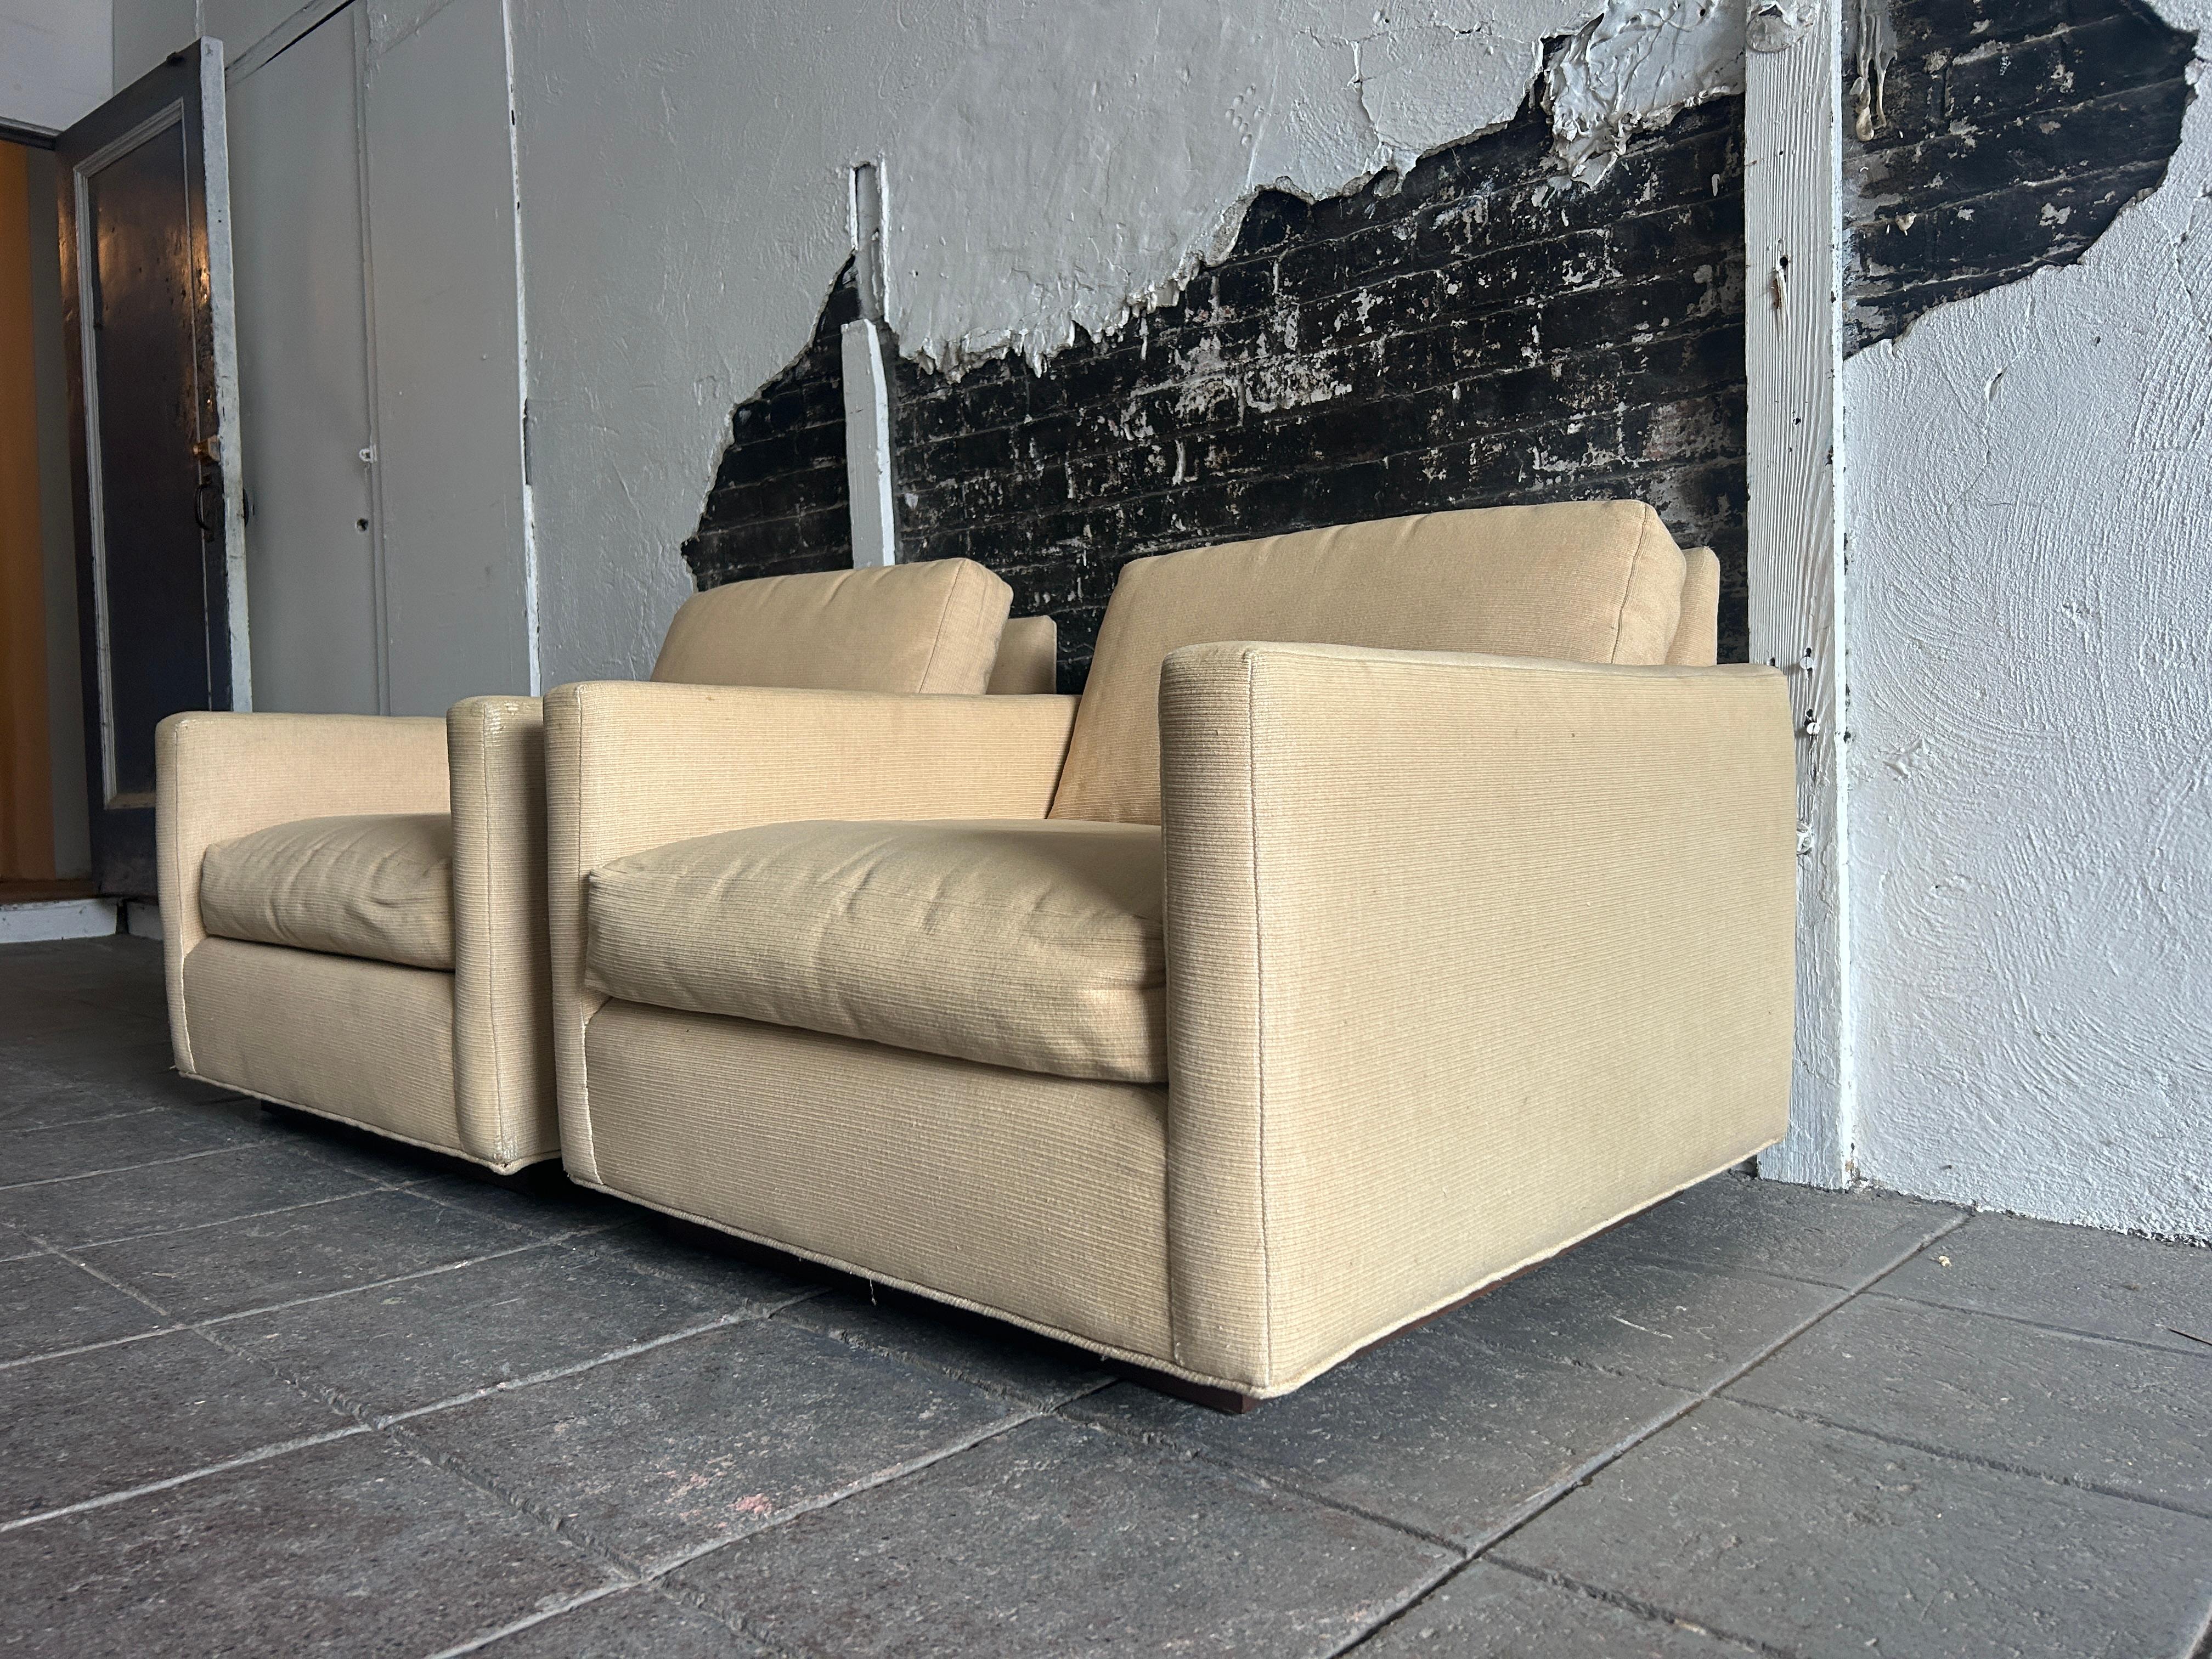 Pair Mid Century low tan lounge club cube chairs walnut base. Great set of low cube chairs in sand tan thick woven cotton upholstery. Floating square base in walnut. In the style of Milo Baughman. Made in USA located in Brooklyn NYC.

Sold as a pair